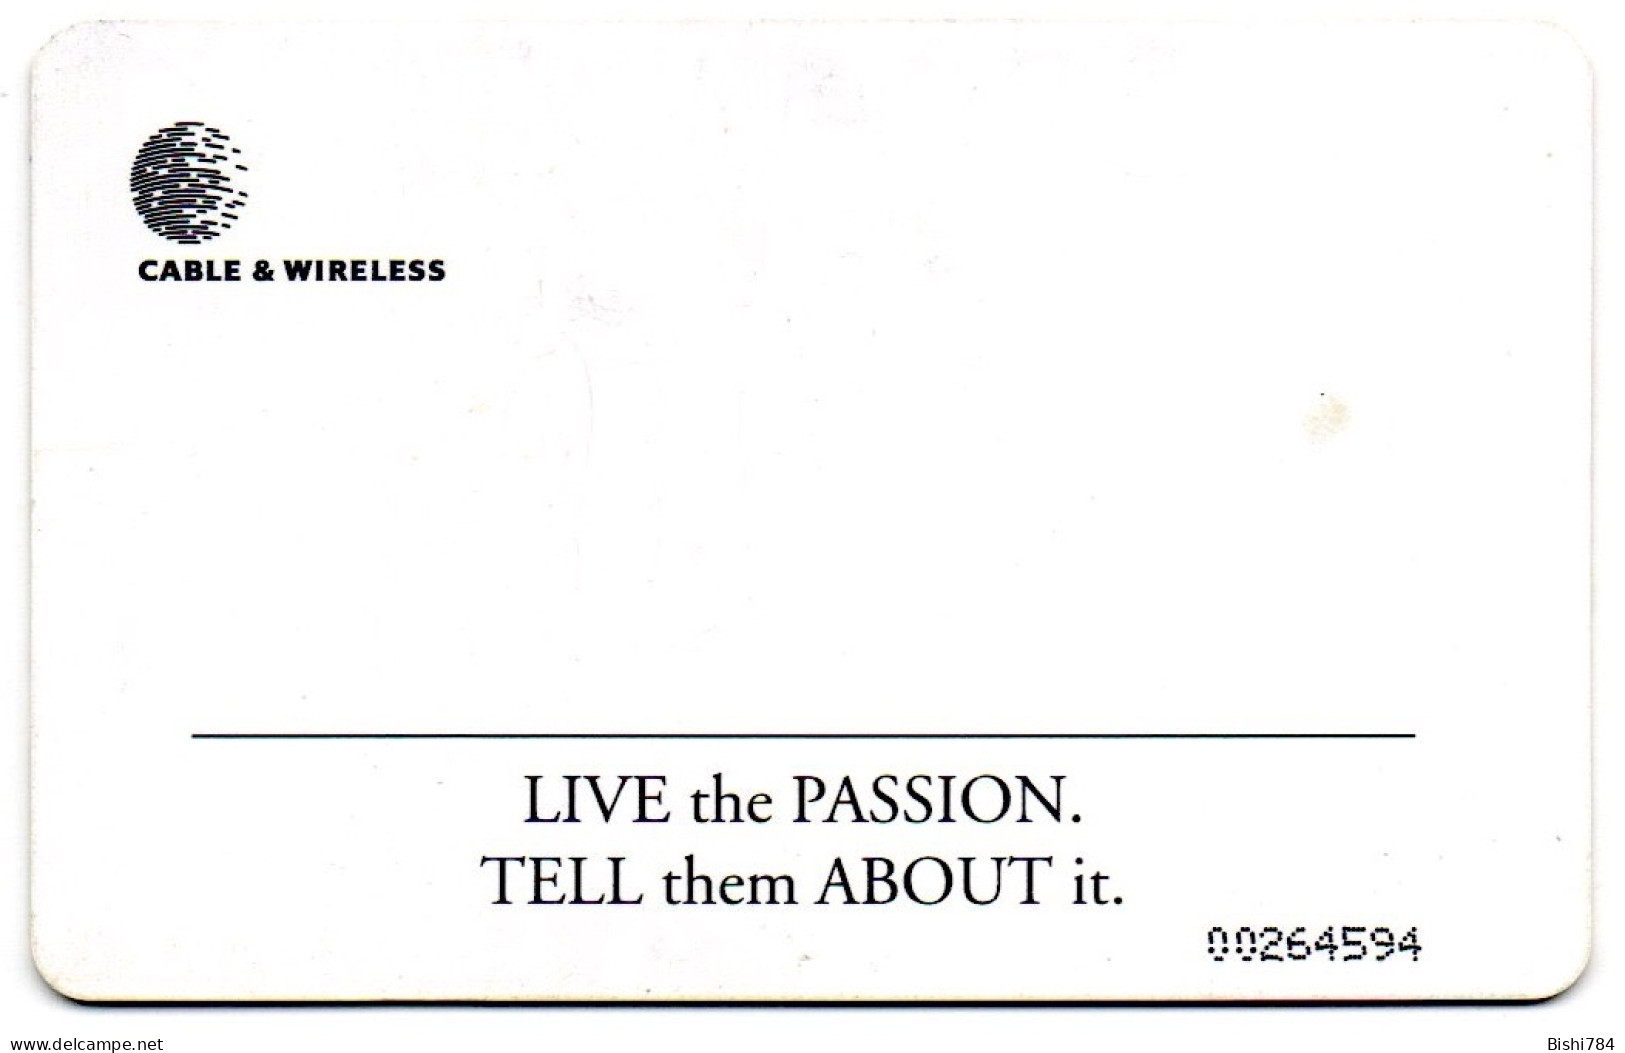 St. Lucia - Live The Passion (Cricketers) General Card - 0026XXXX - Sainte Lucie